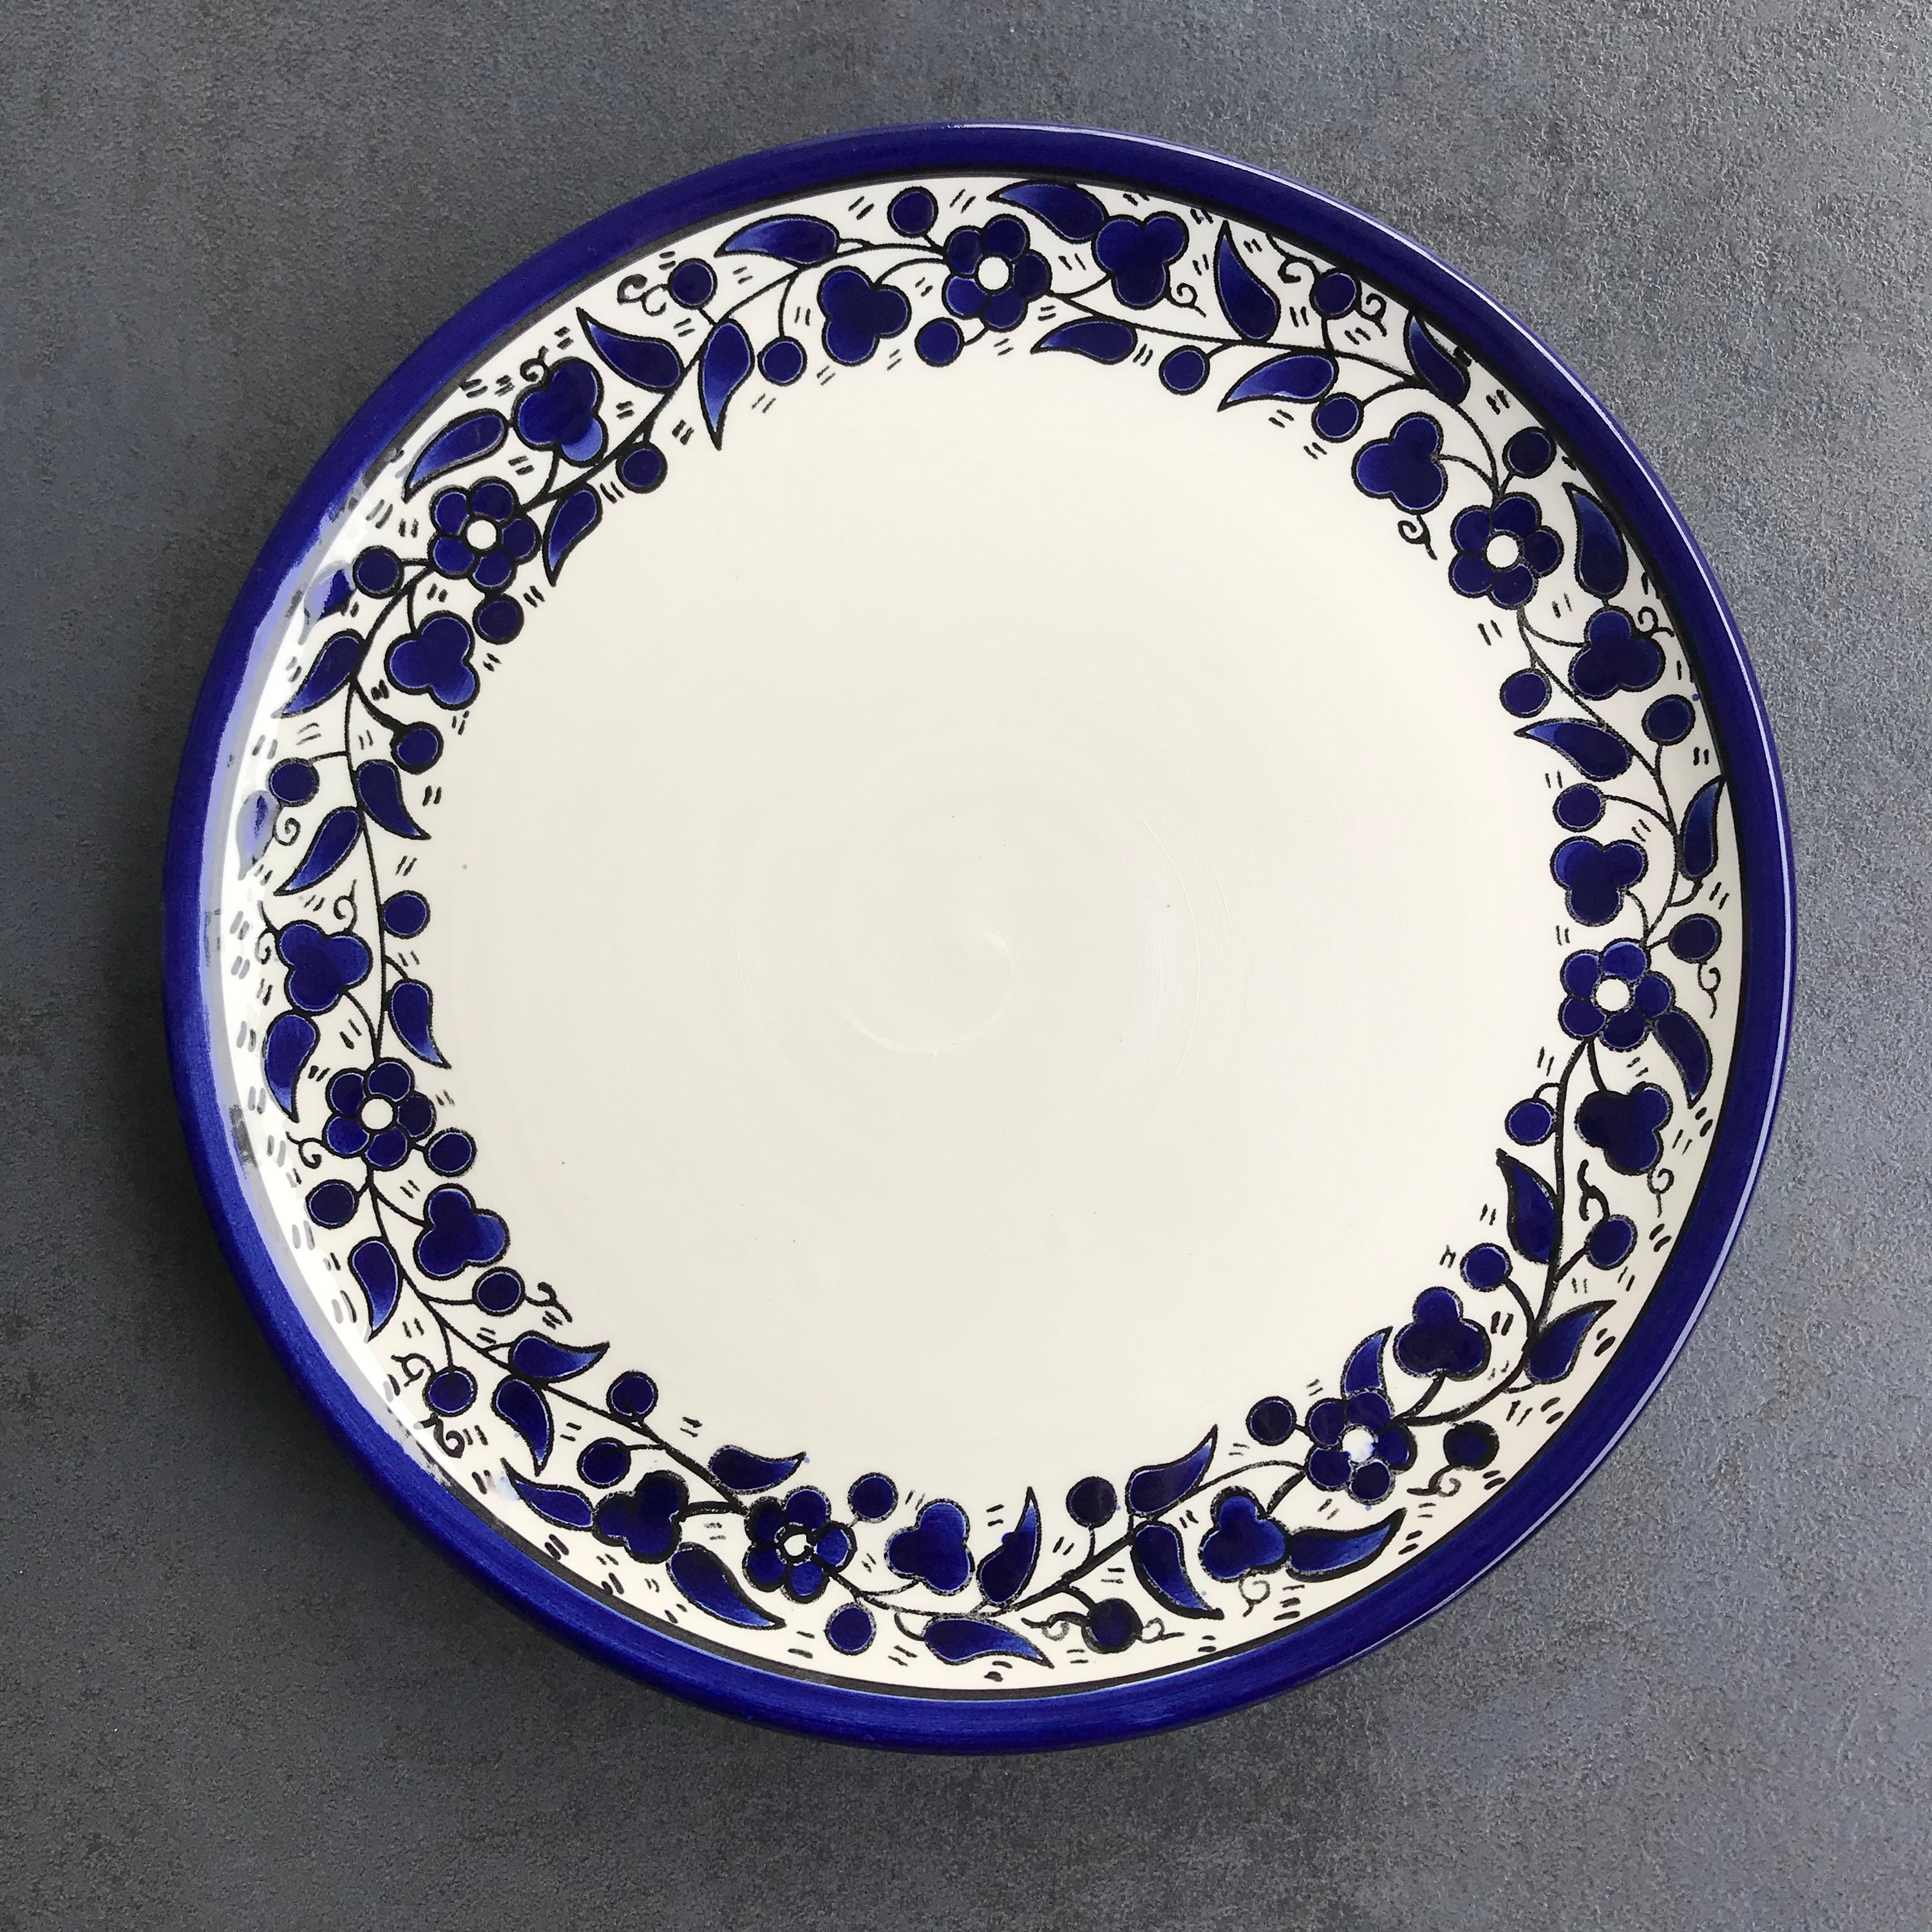 Crockery Set With Hand-painted Blue and White Flowers, Table